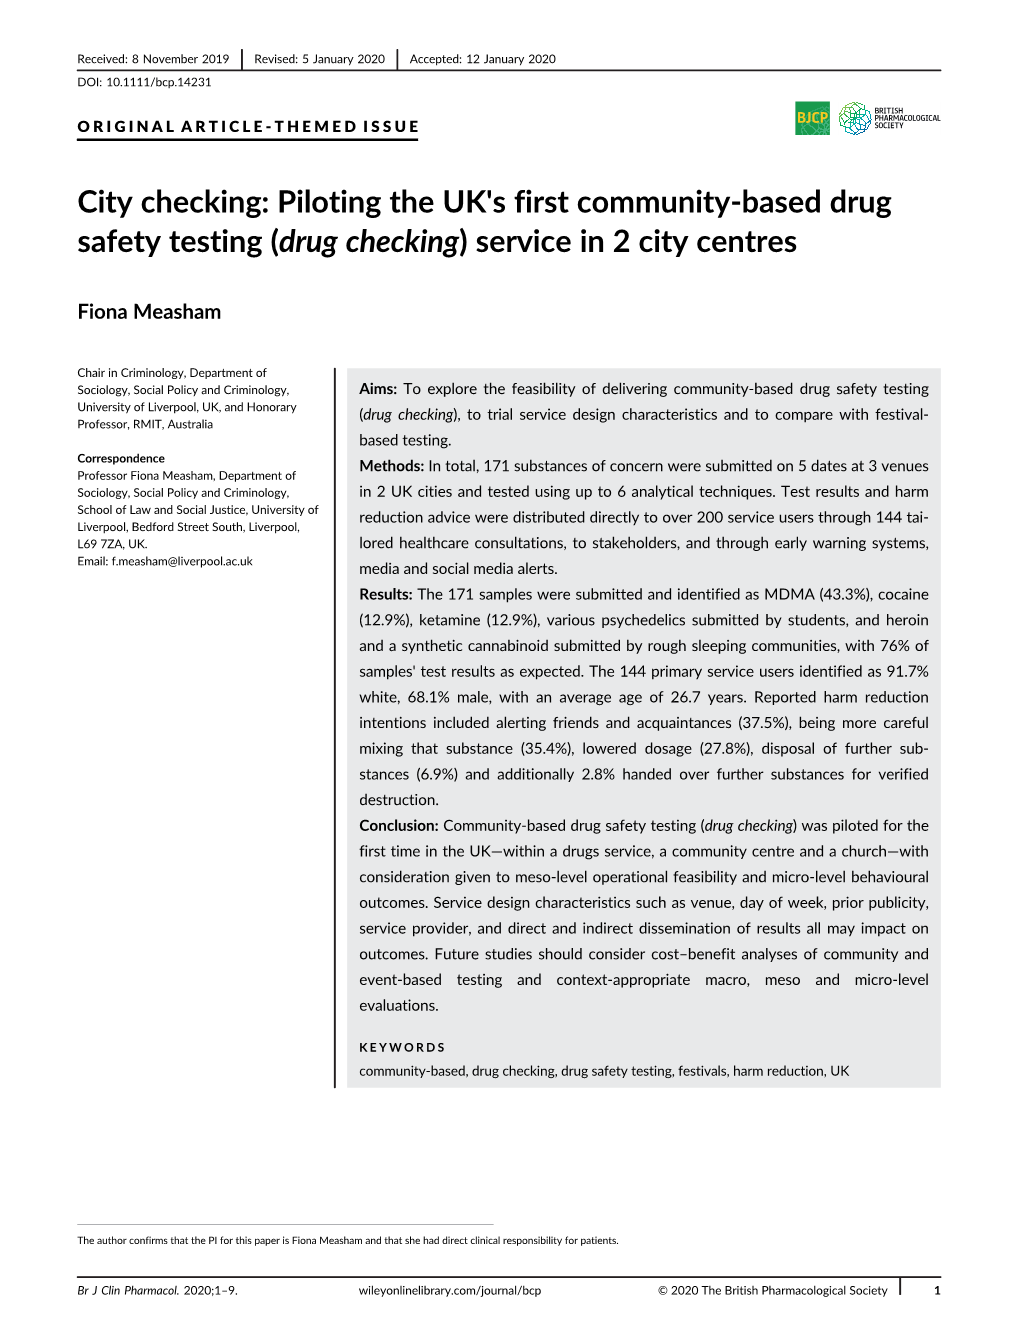 Piloting the UK's First Community‐Based Drug Safety Testing